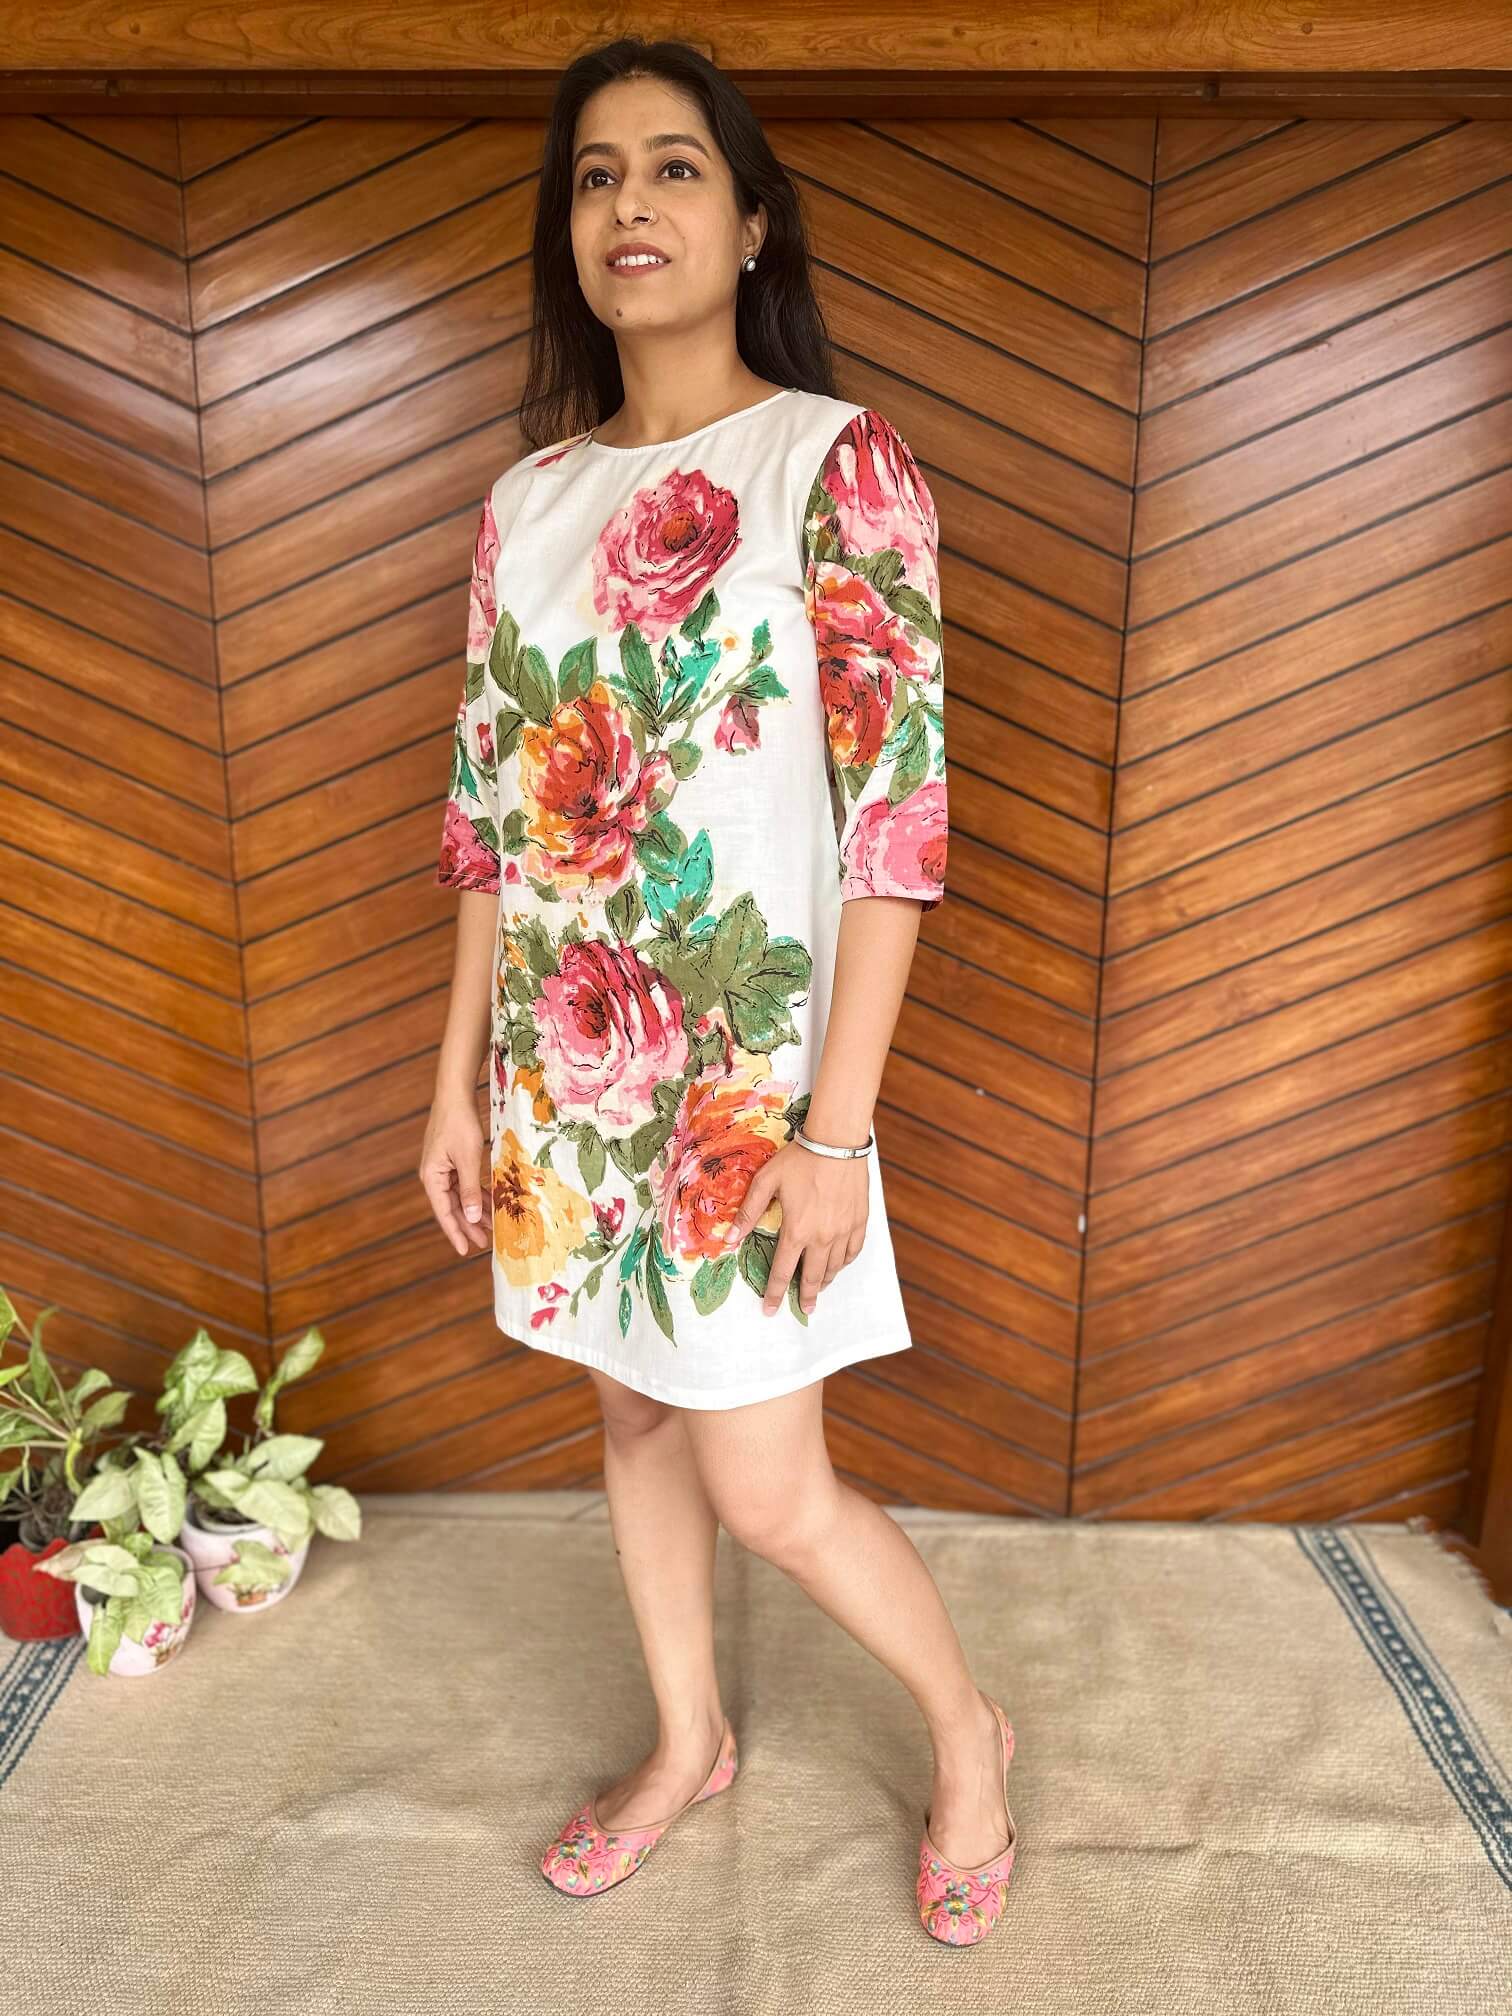 designer wear handmade dress in white cotton with roses